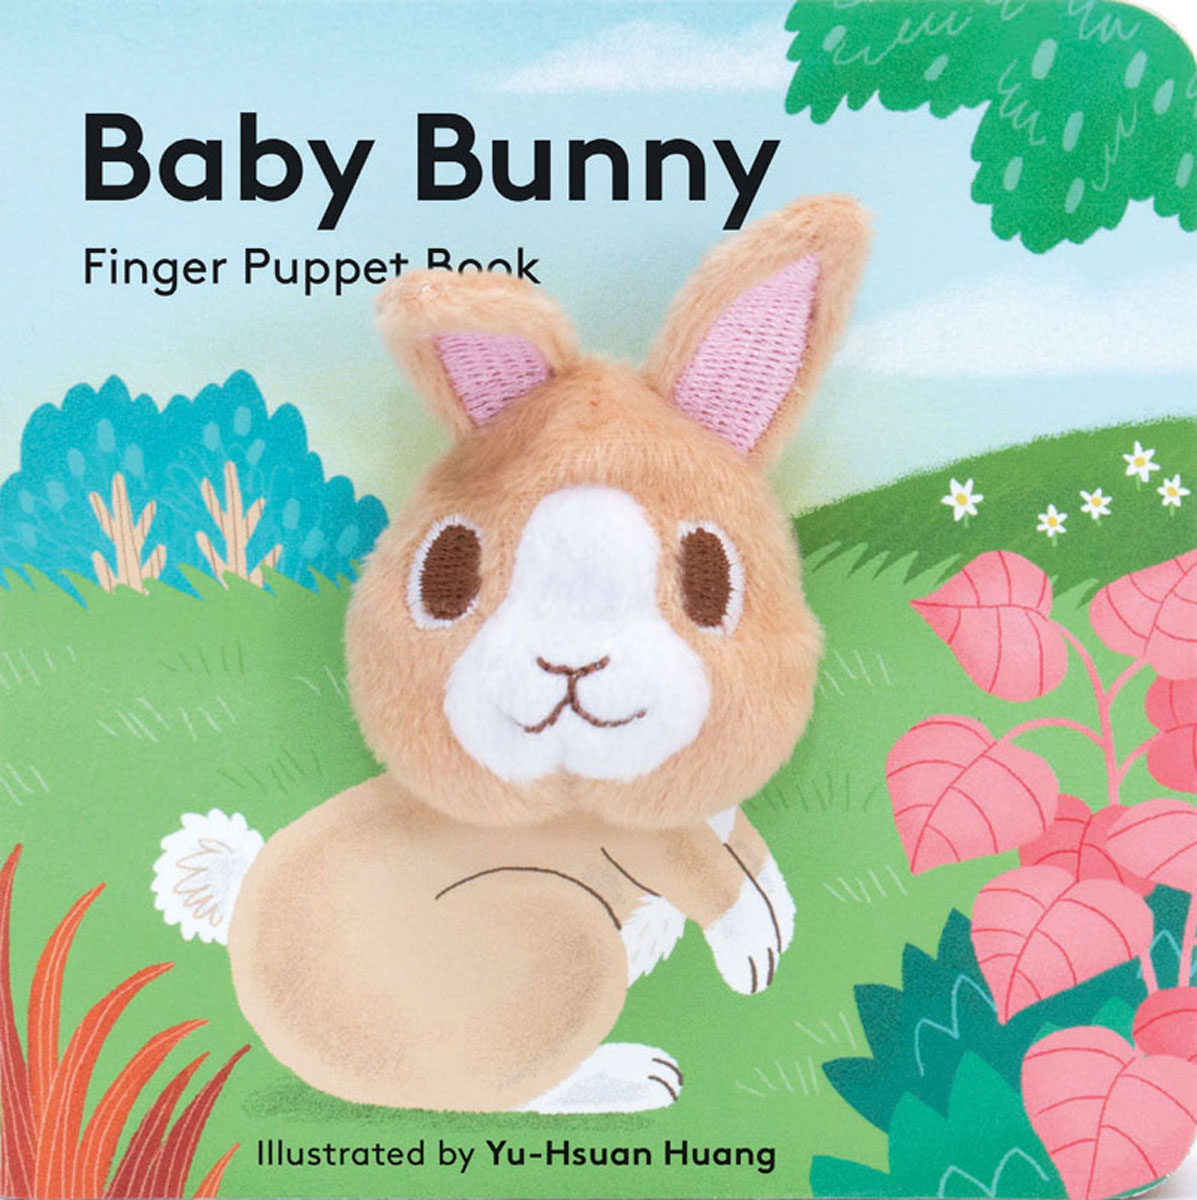 small puppet book featuring adorable baby bunny